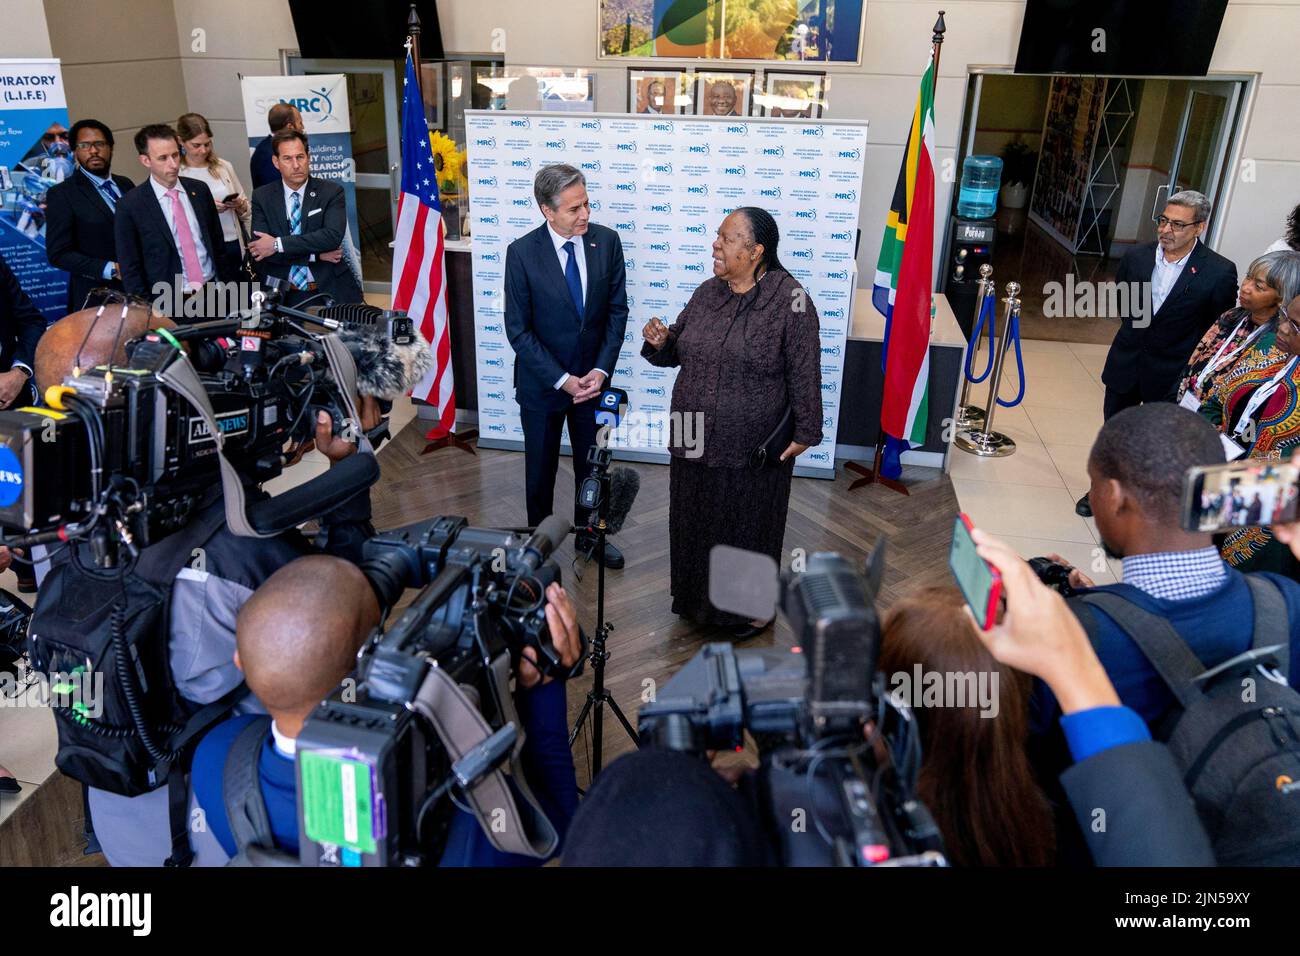 U.S. Secretary of State Antony Blinken and South Africa's Foreign Minister Naledi Pandor speak to members of the media after attending a Women's Day Event at the South African Medical Research Council in Pretoria, South Africa, August 9, 2022. Andrew Harnik/Pool via REUTERS Stock Photo